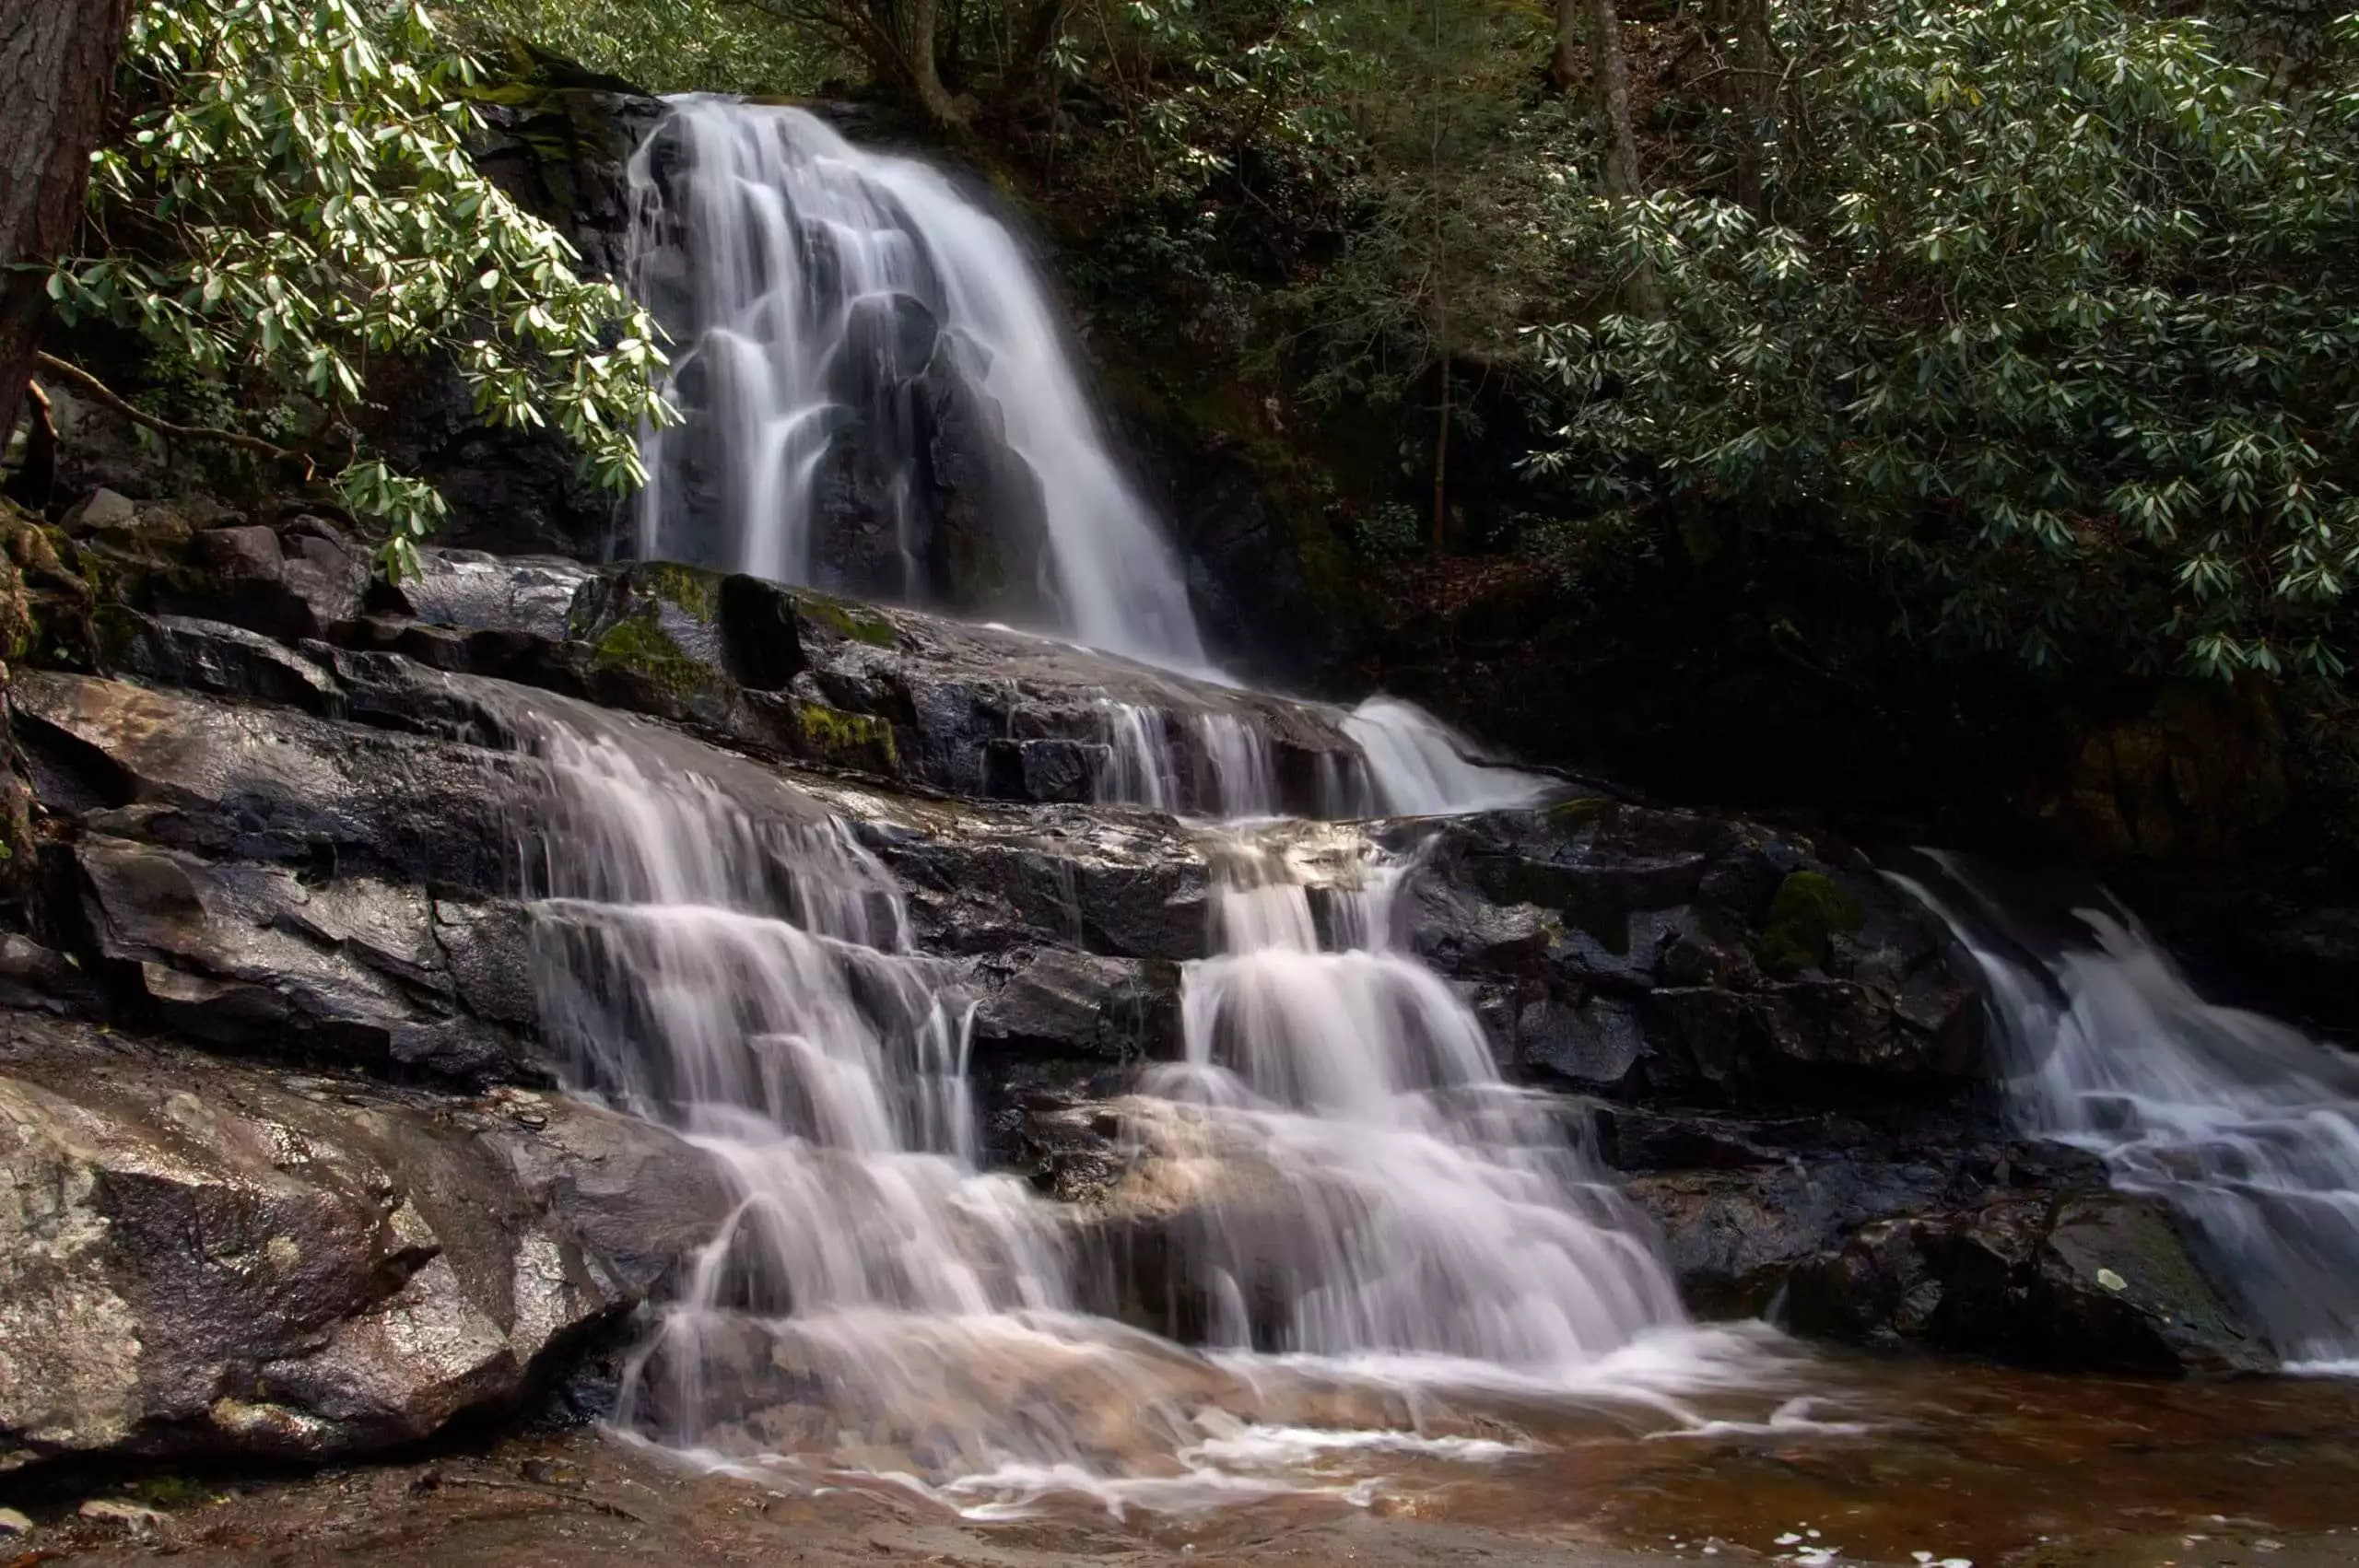 Laurel Falls in the Smoky Mountains